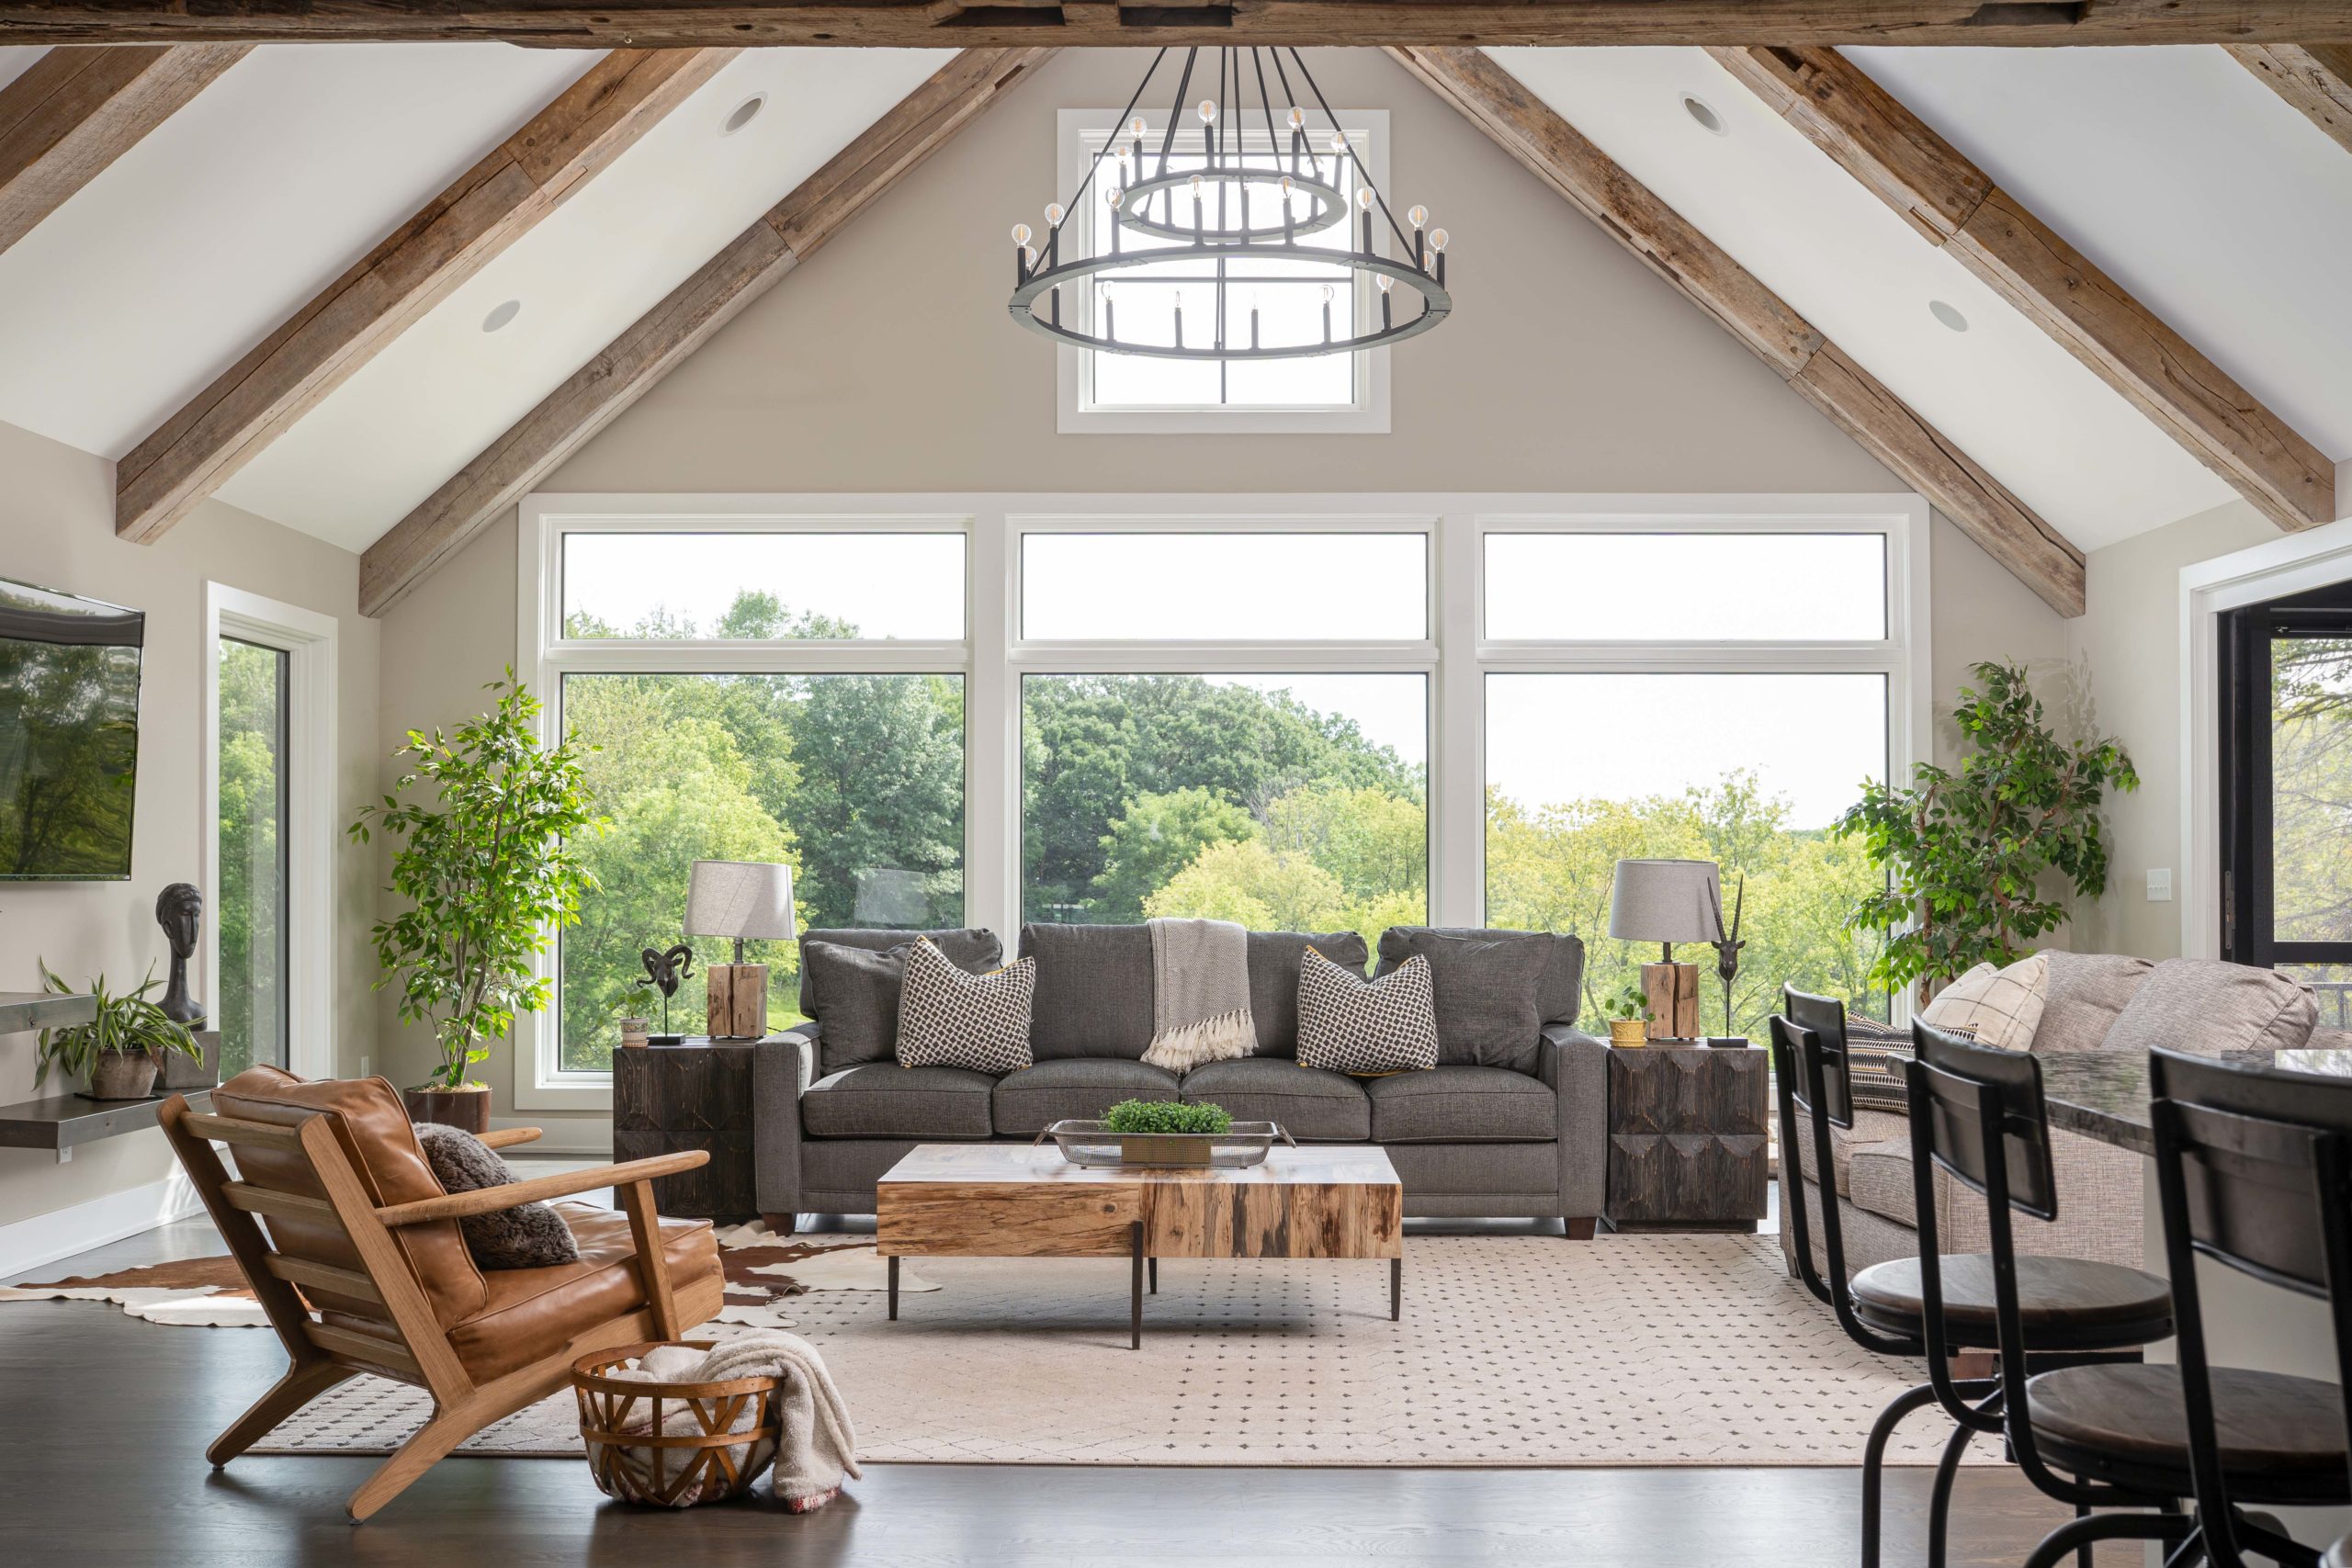 A living room with large windows and wood beams in our Kitchens portfolio.